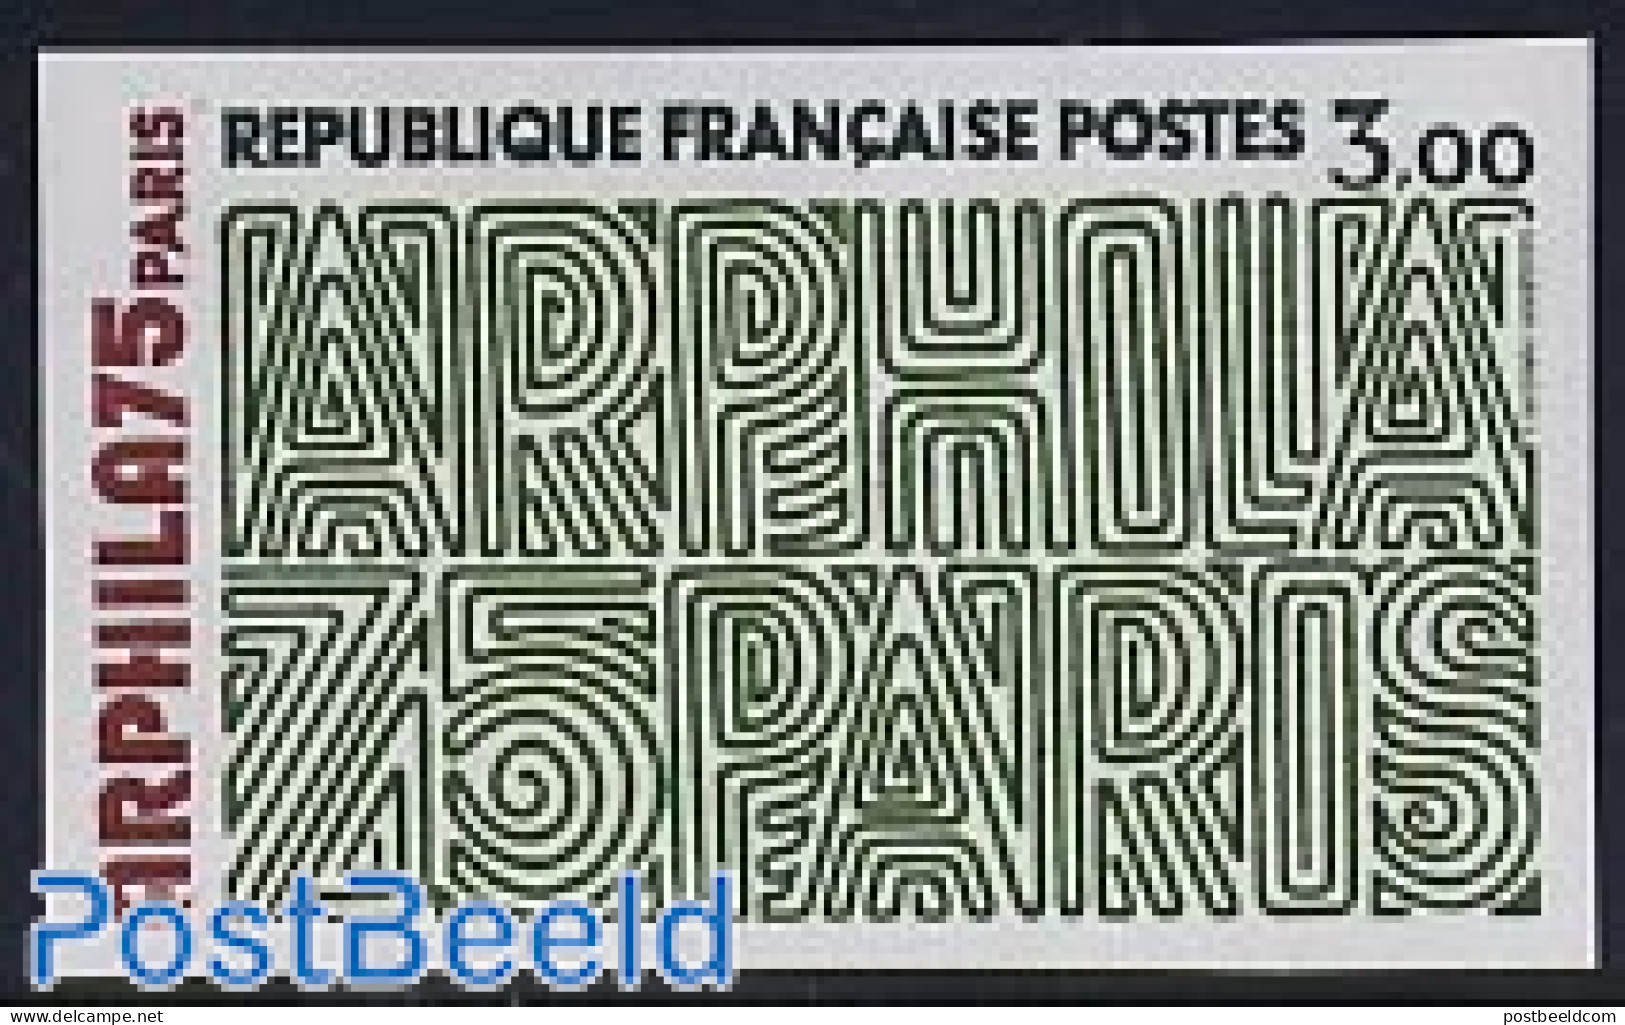 France 1975 Arphila 1v Imperforated, Mint NH, Philately - Unused Stamps